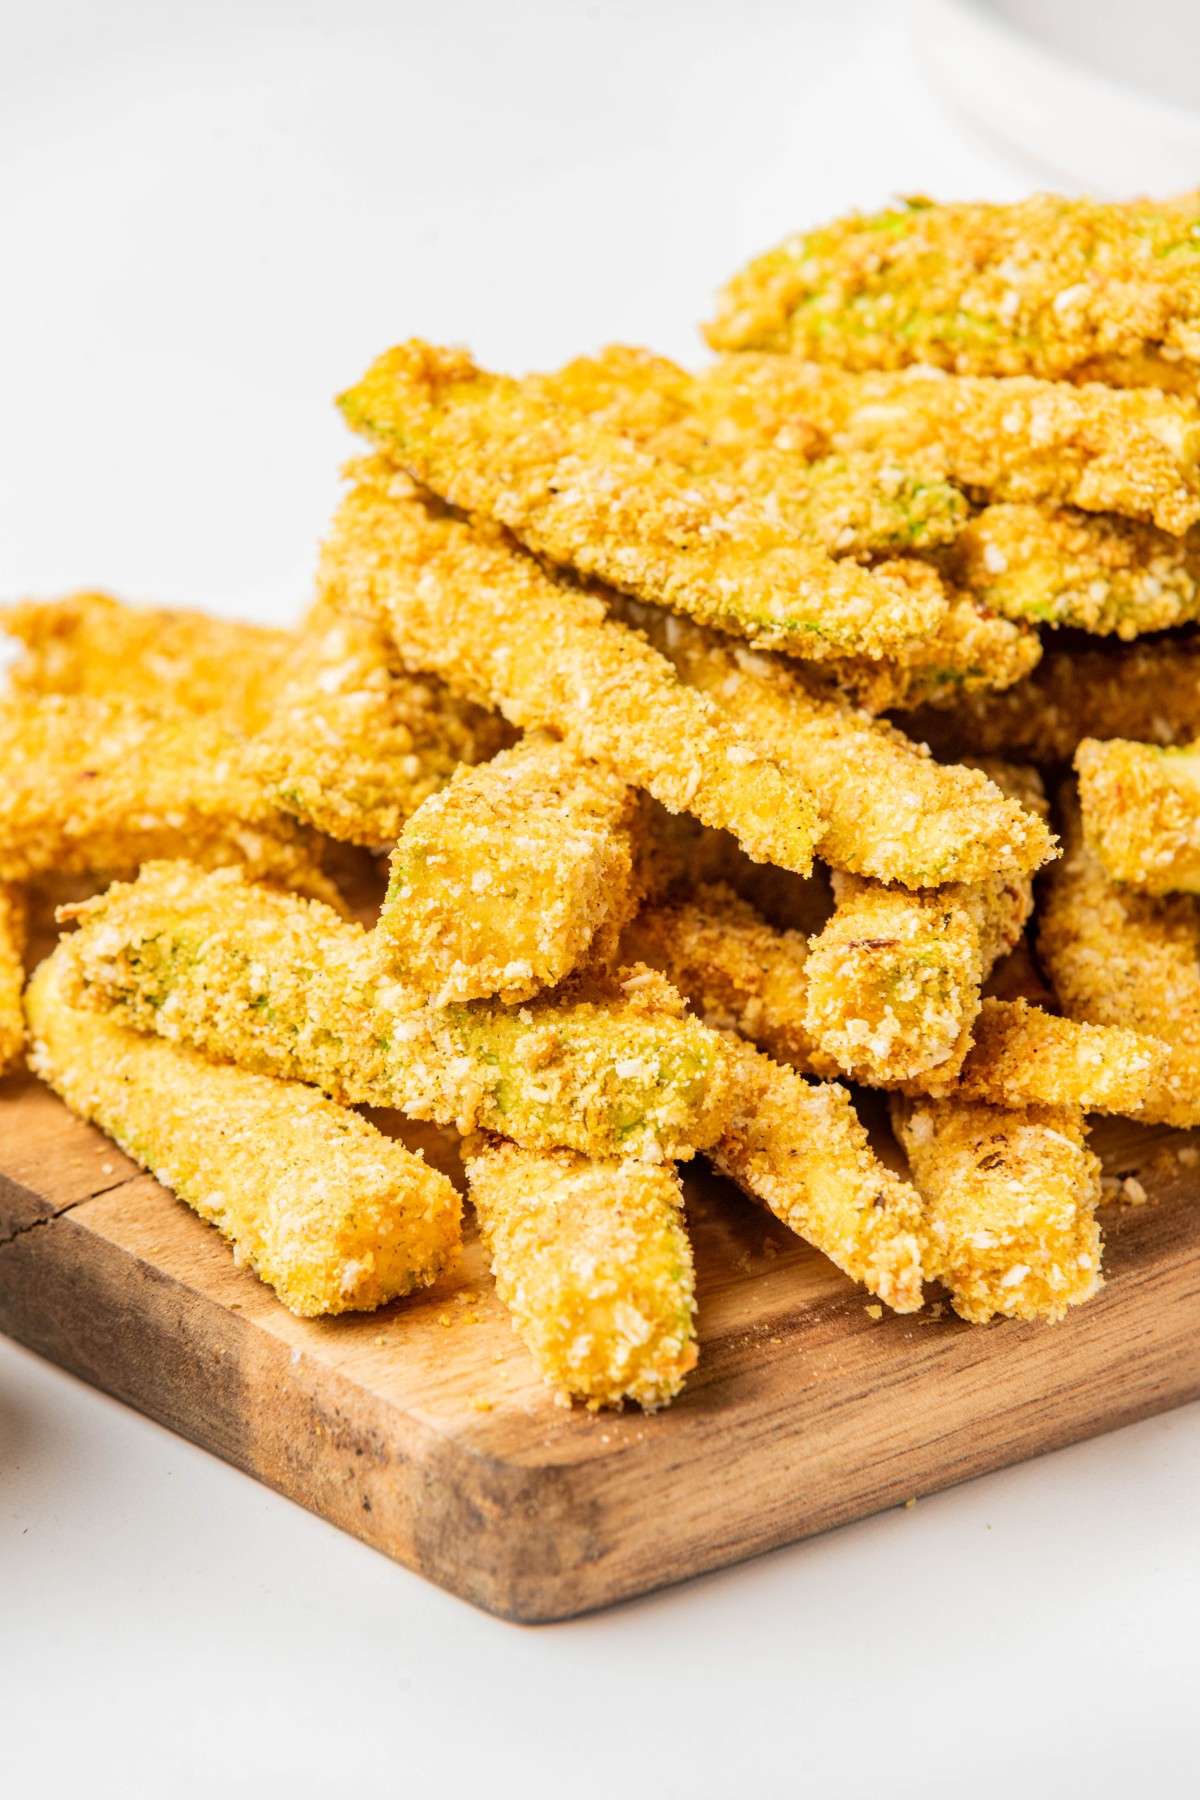 low carb zucchini fries piled on top of each other on a wooden board.